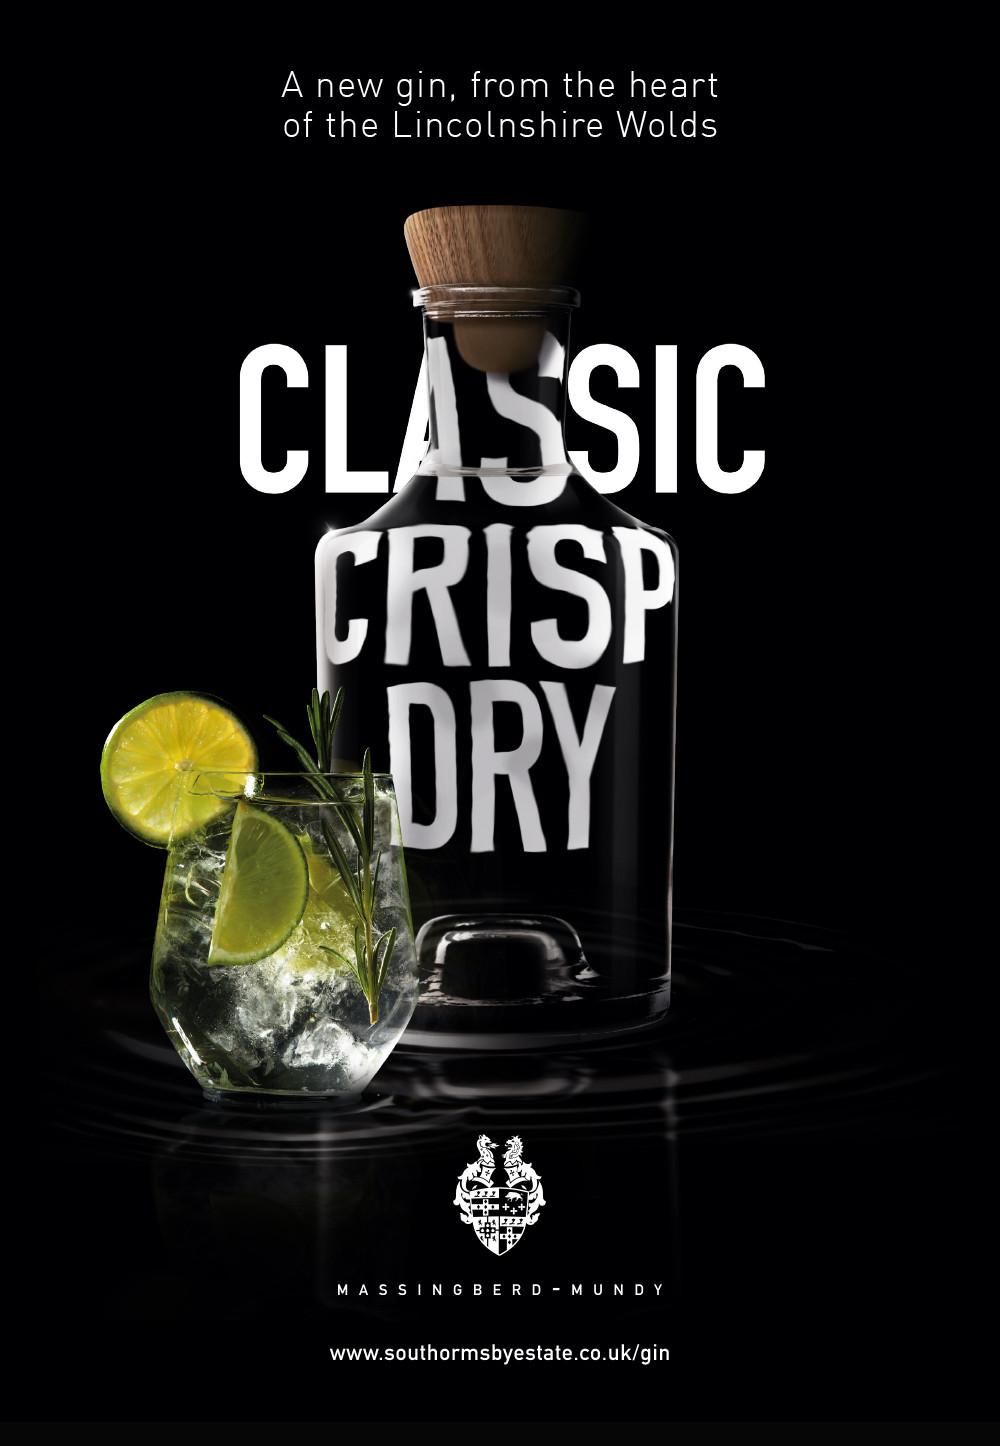 South ormsby massingberd mundy gin advert design by root studio2